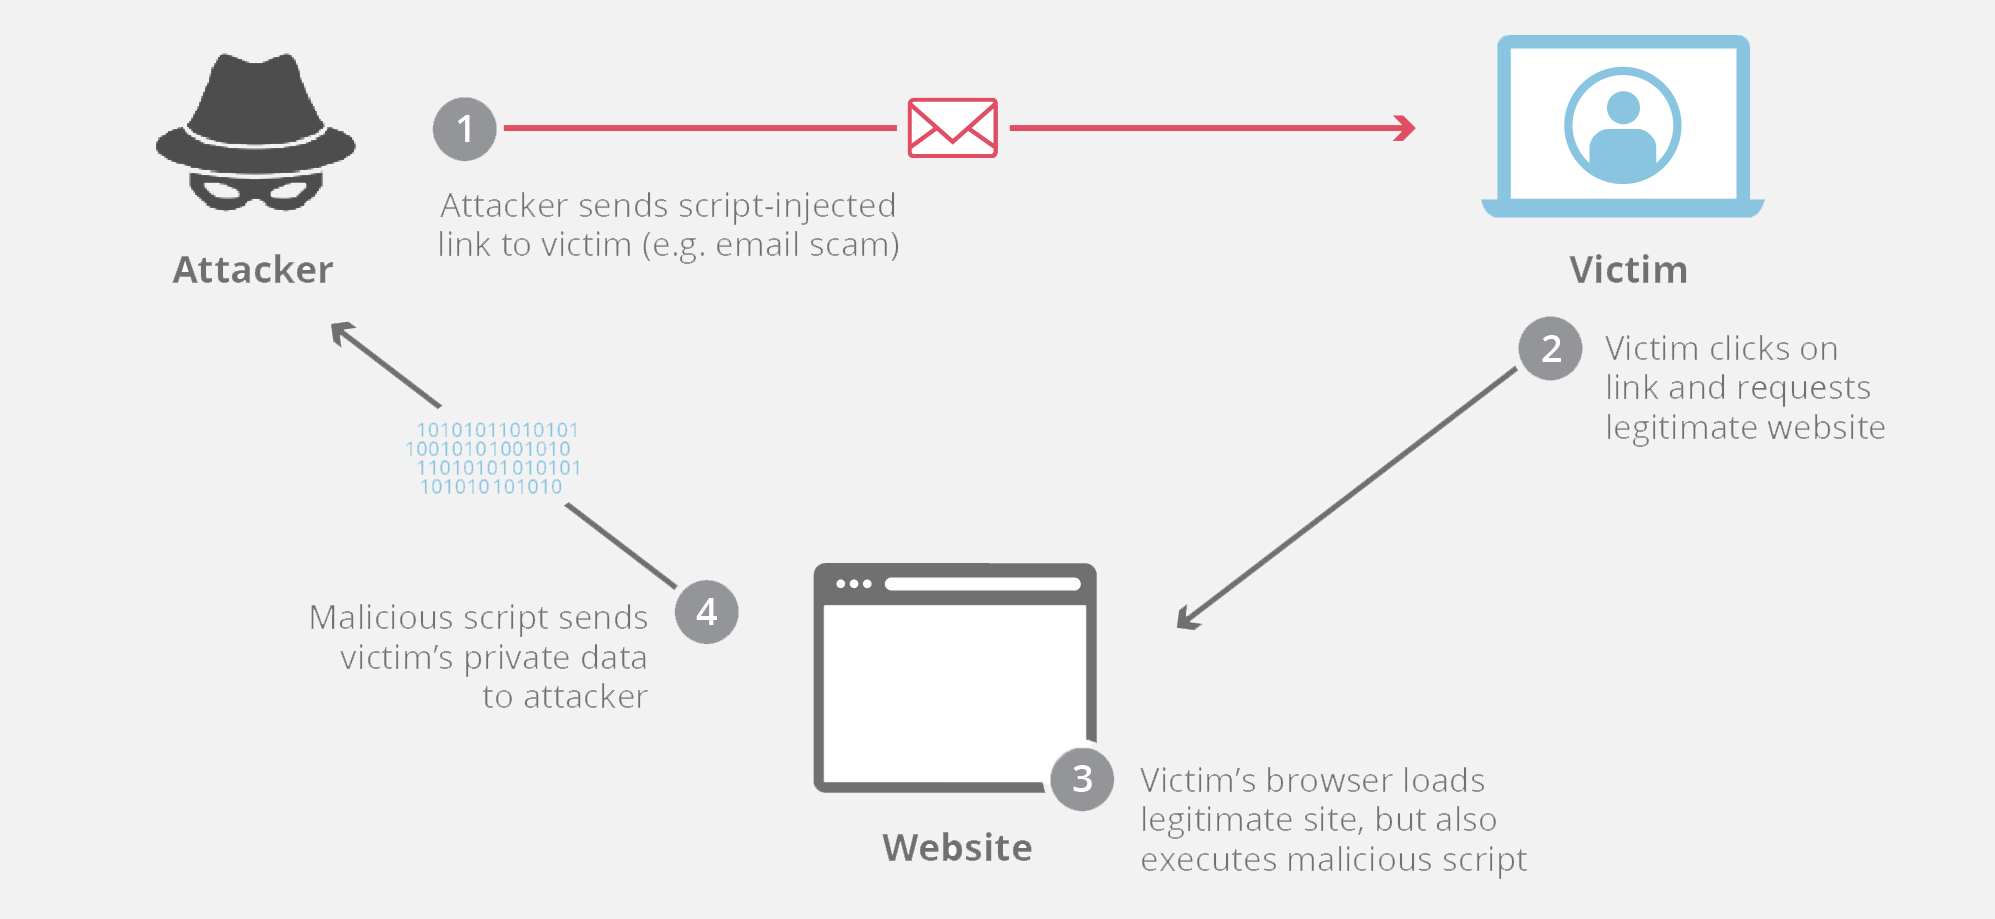 What Is Cross-Site Scripting? | Cloudflare